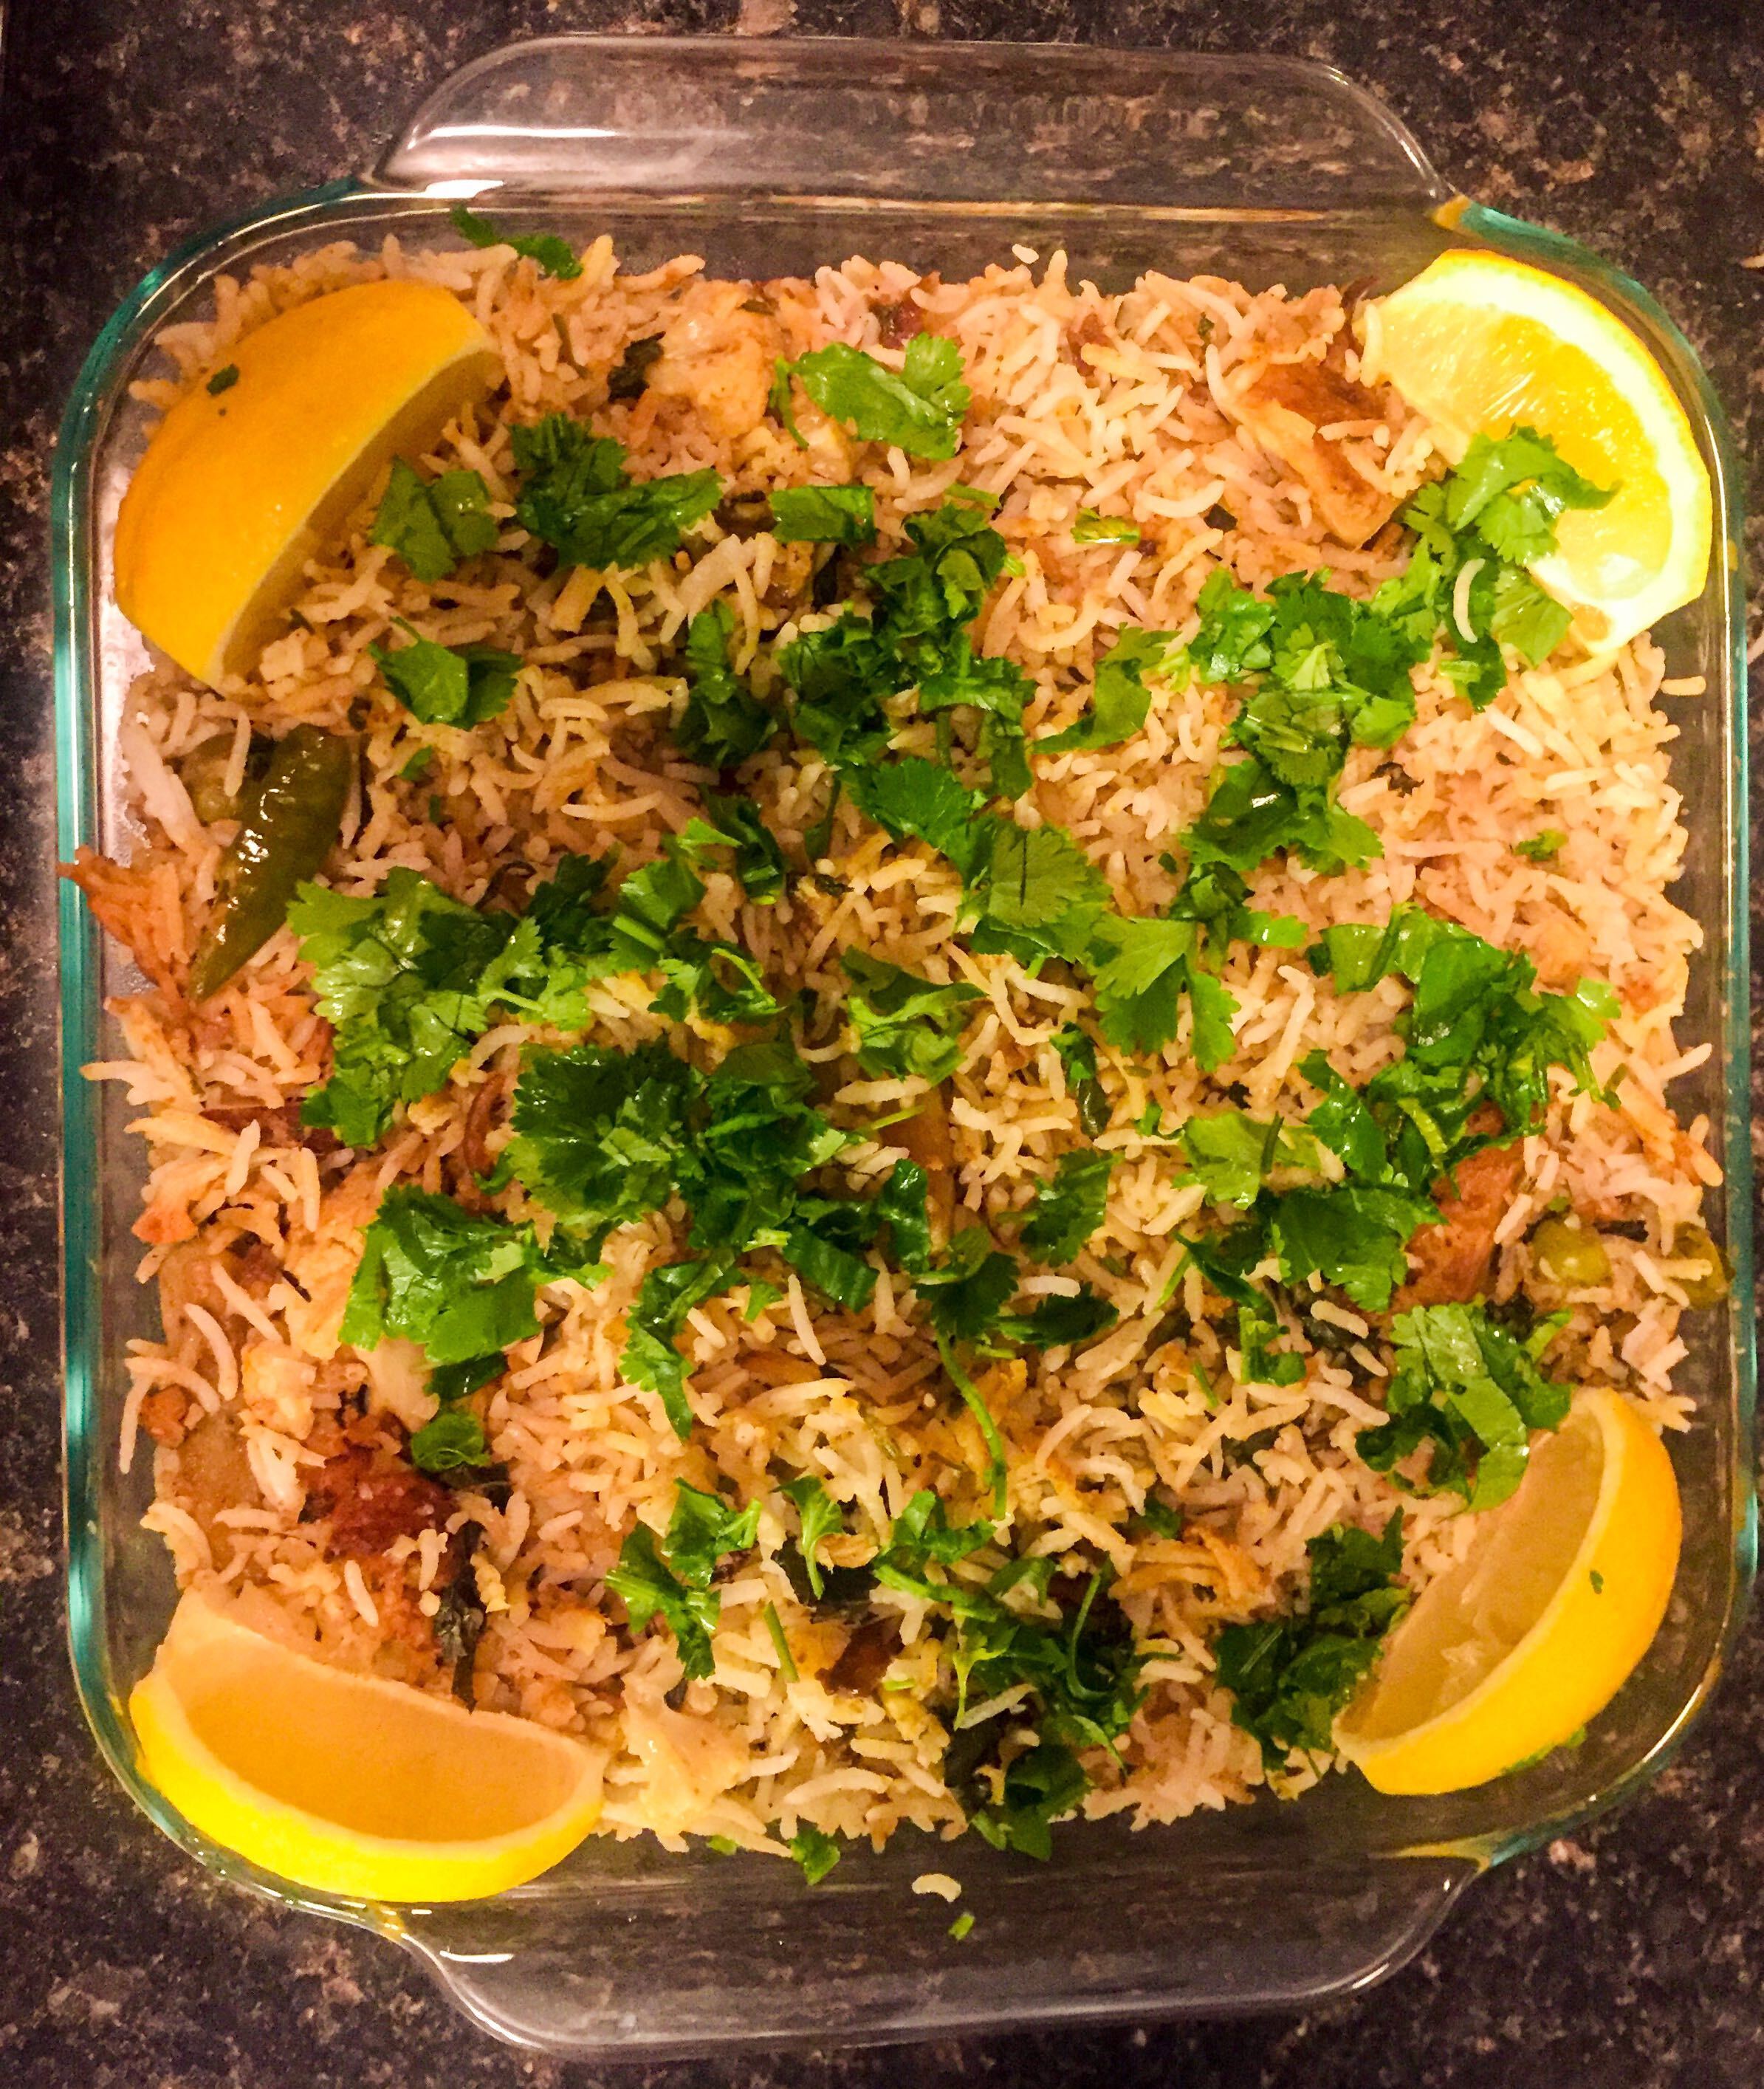 A rice dish Sree made for the IT competition